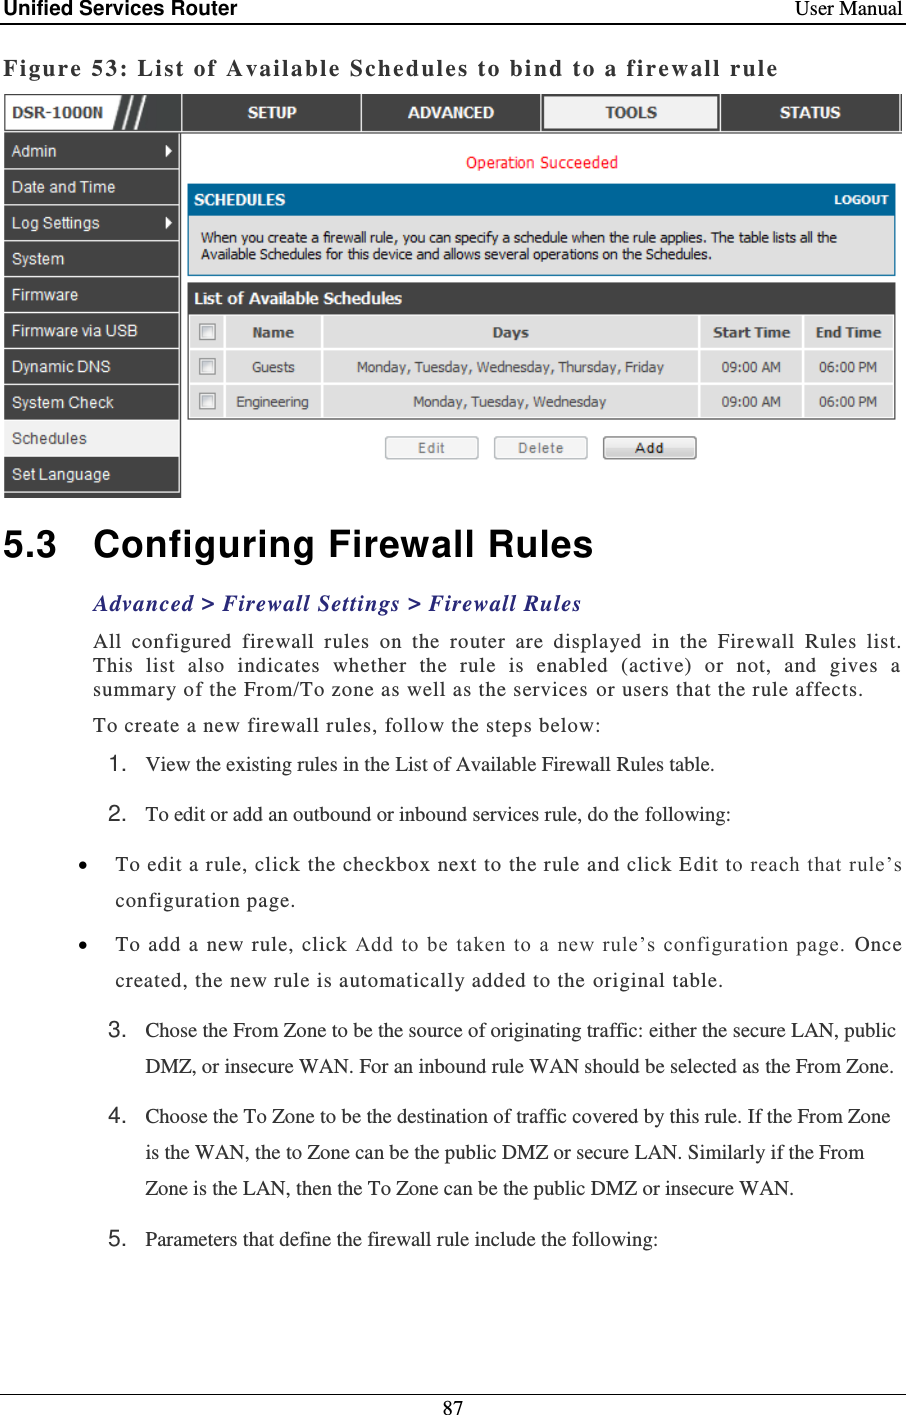 Unified Services Router    User Manual 87  Figure 53: Li st of Available Schedules t o bind to a firewall rule   5.3  Configuring Firewall Rules Advanced &gt; Firewall Settings &gt; Firewall Rules All  configured  firewall  rules  on  the  router  are  displayed  in  the  Firewall  Rules  list. This  list  also  indicates  whether  the  rule  is  enabled  (active)  or  not,  and  gives  a summary of the From/To zone as well as the services  or users that the rule affects.  To create a new firewall rules, follow the steps below: 1. View the existing rules in the List of Available Firewall Rules table. 2. To edit or add an outbound or inbound services rule, do the following:  To edit a rule, click the checkbox next to the rule and click E dit to reach that rule’s configuration page.   To  add  a  new  rule, click  Add to  be taken to a new rule’s  configuration  page.  Once created, the new rule is automatically added to the original table.  3. Chose the From Zone to be the source of originating traffic: either the secure LAN, public DMZ, or insecure WAN. For an inbound rule WAN should be selected as the From Zone. 4. Choose the To Zone to be the destination of traffic covered by this rule. If the From Zone is the WAN, the to Zone can be the public DMZ or secure LAN. Similarly if the From Zone is the LAN, then the To Zone can be the public DMZ or insecure WAN.  5. Parameters that define the firewall rule include the following: 